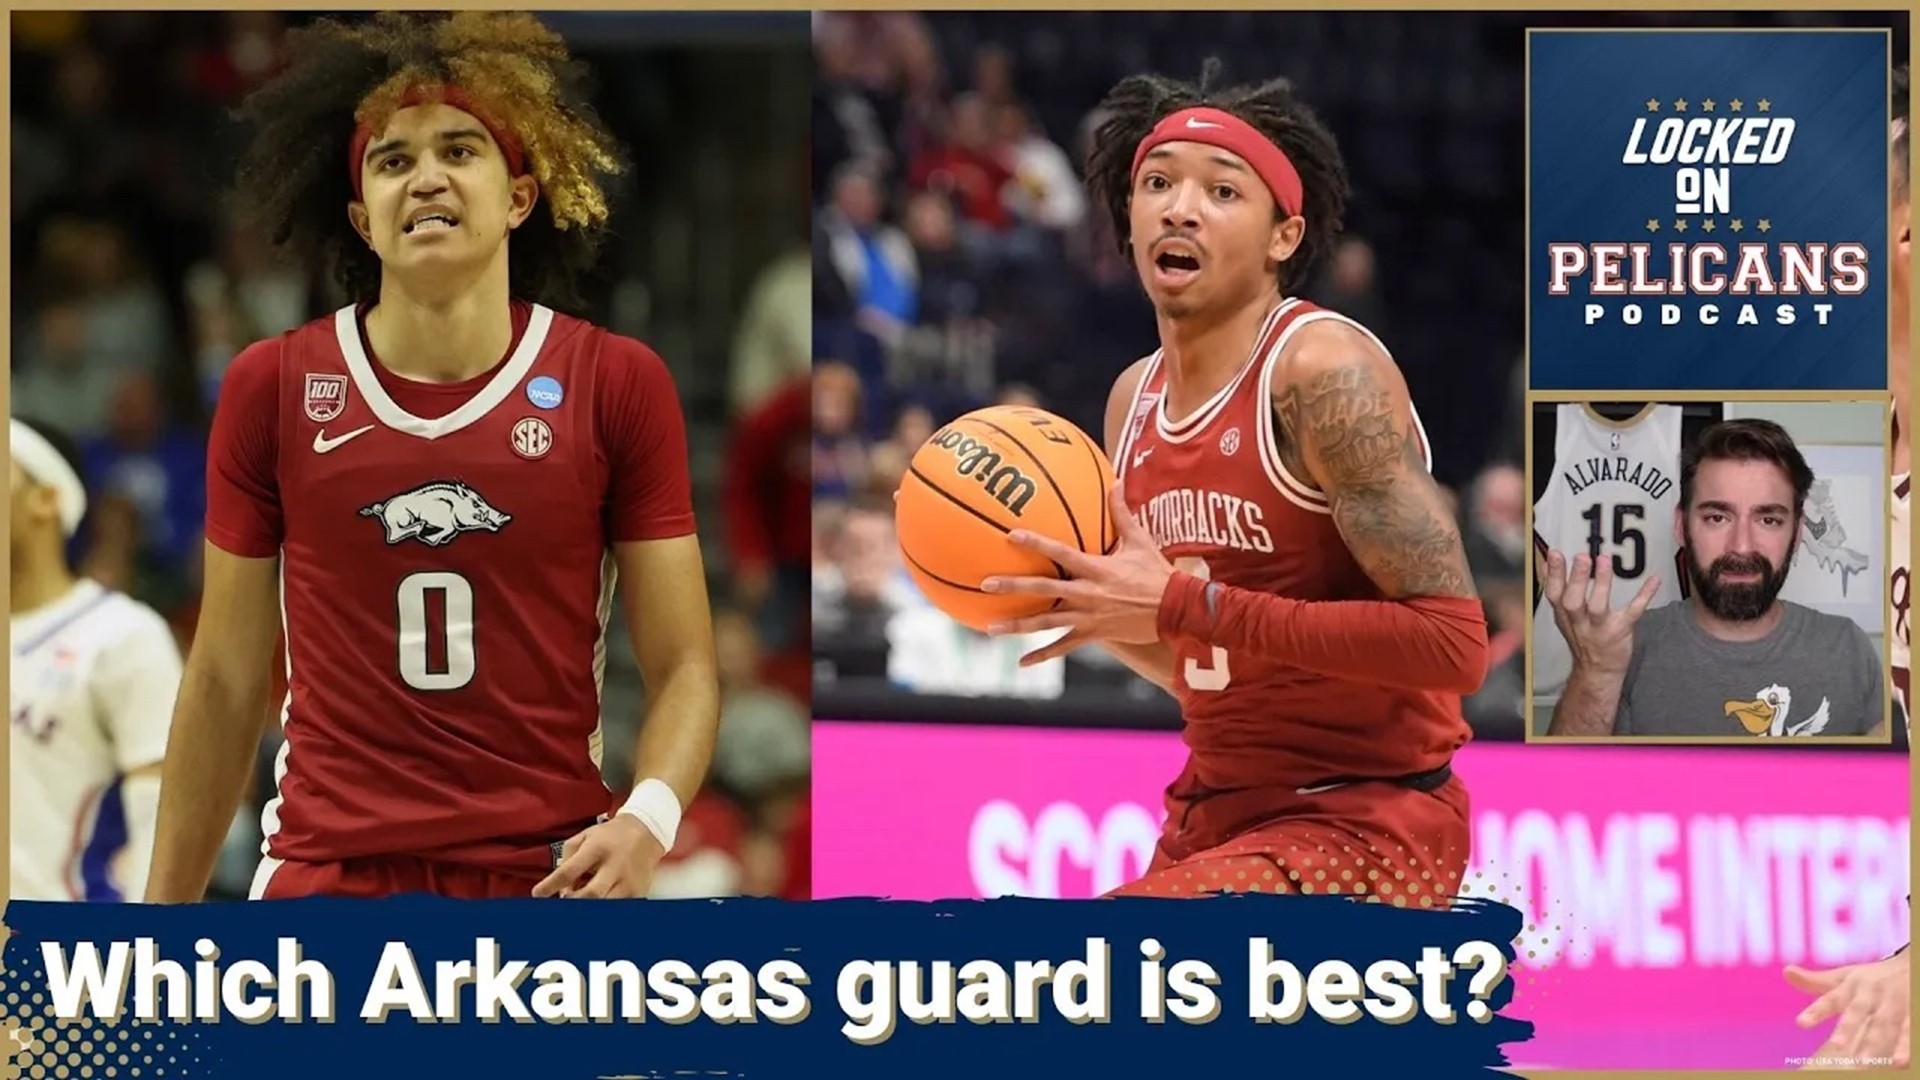 Anthony Black and Nick Smith Jr are both guards and projected lottery picks from Arkansas but Jake Madison only thinks one of them is a good fit for the New Orleans